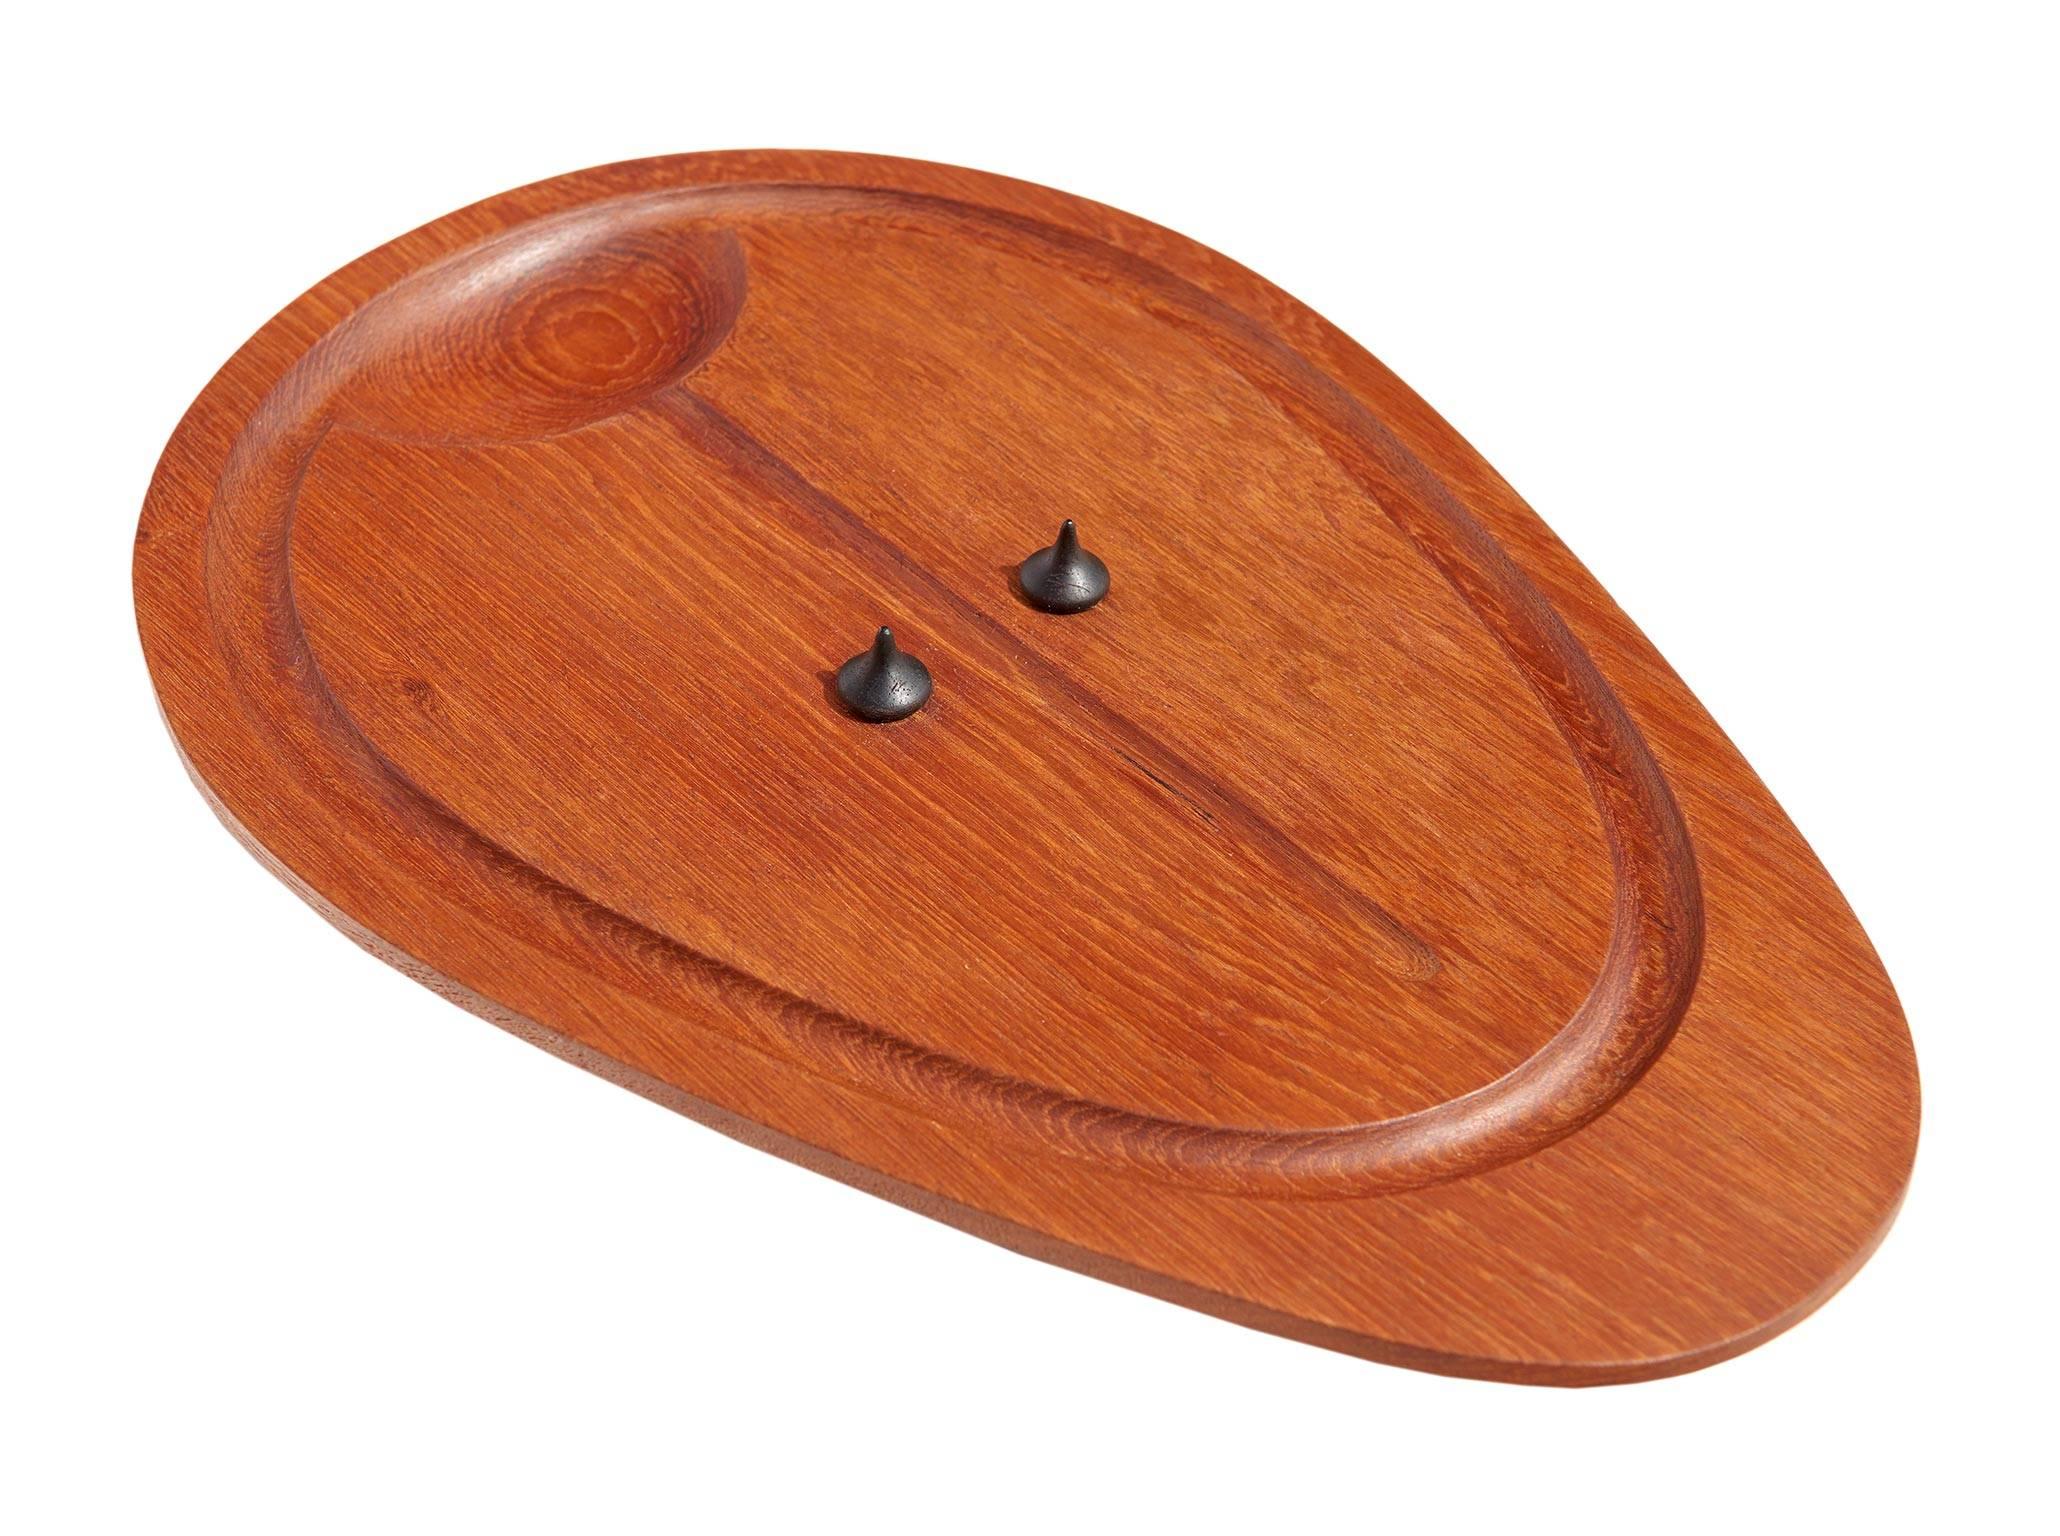 The great Danish artisan's anthropomorphic take on a simple board for carving beef is both playful and practical, delightfully resembling a stylized-abstract Primitive mask. The two Brazil rosewood tines (intended to hold the meat in place while